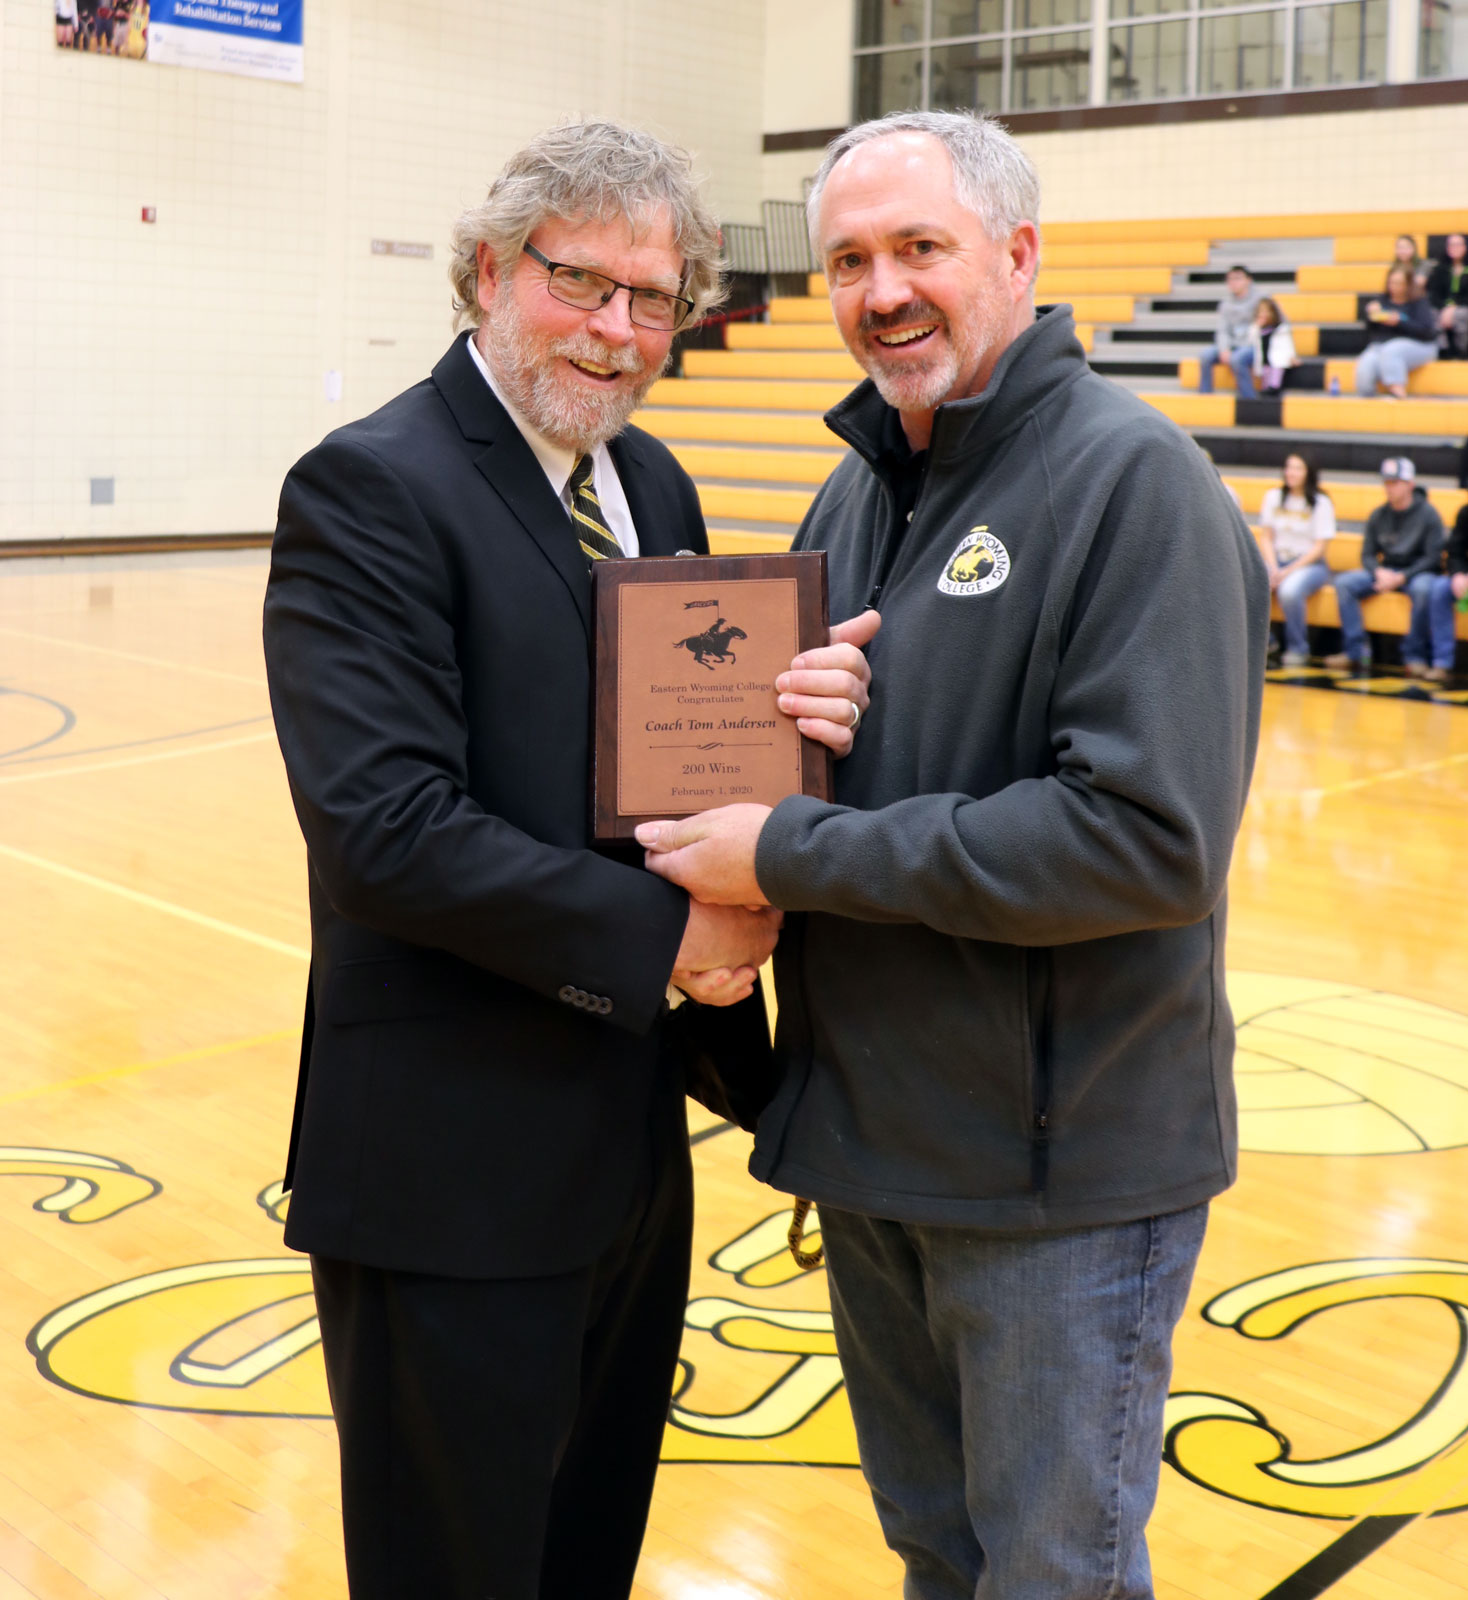 Left to right: Tom Andersen receives a plaque from Roger Humphrey, Vice President for Student Services commemorating his 200th win.